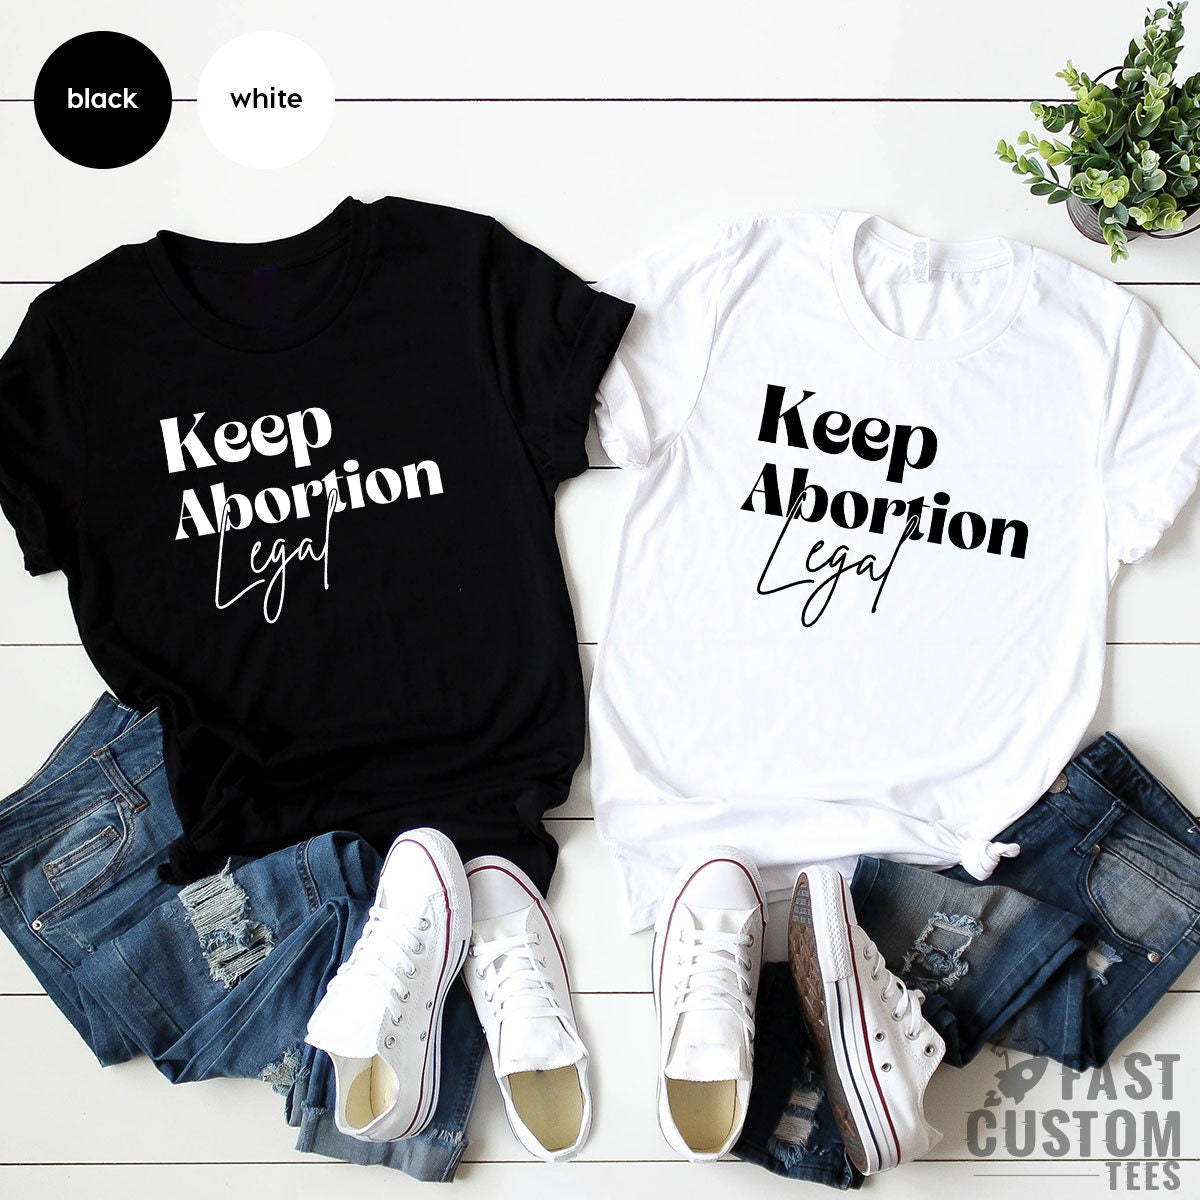 Keep Abortion Legal Shirt, Feminist Shirt, Pro Choice Shirt, Protest T-shirt, Women's Right Shirts, Gift For Her, Shirts For Women, Girl Tee - Fastdeliverytees.com